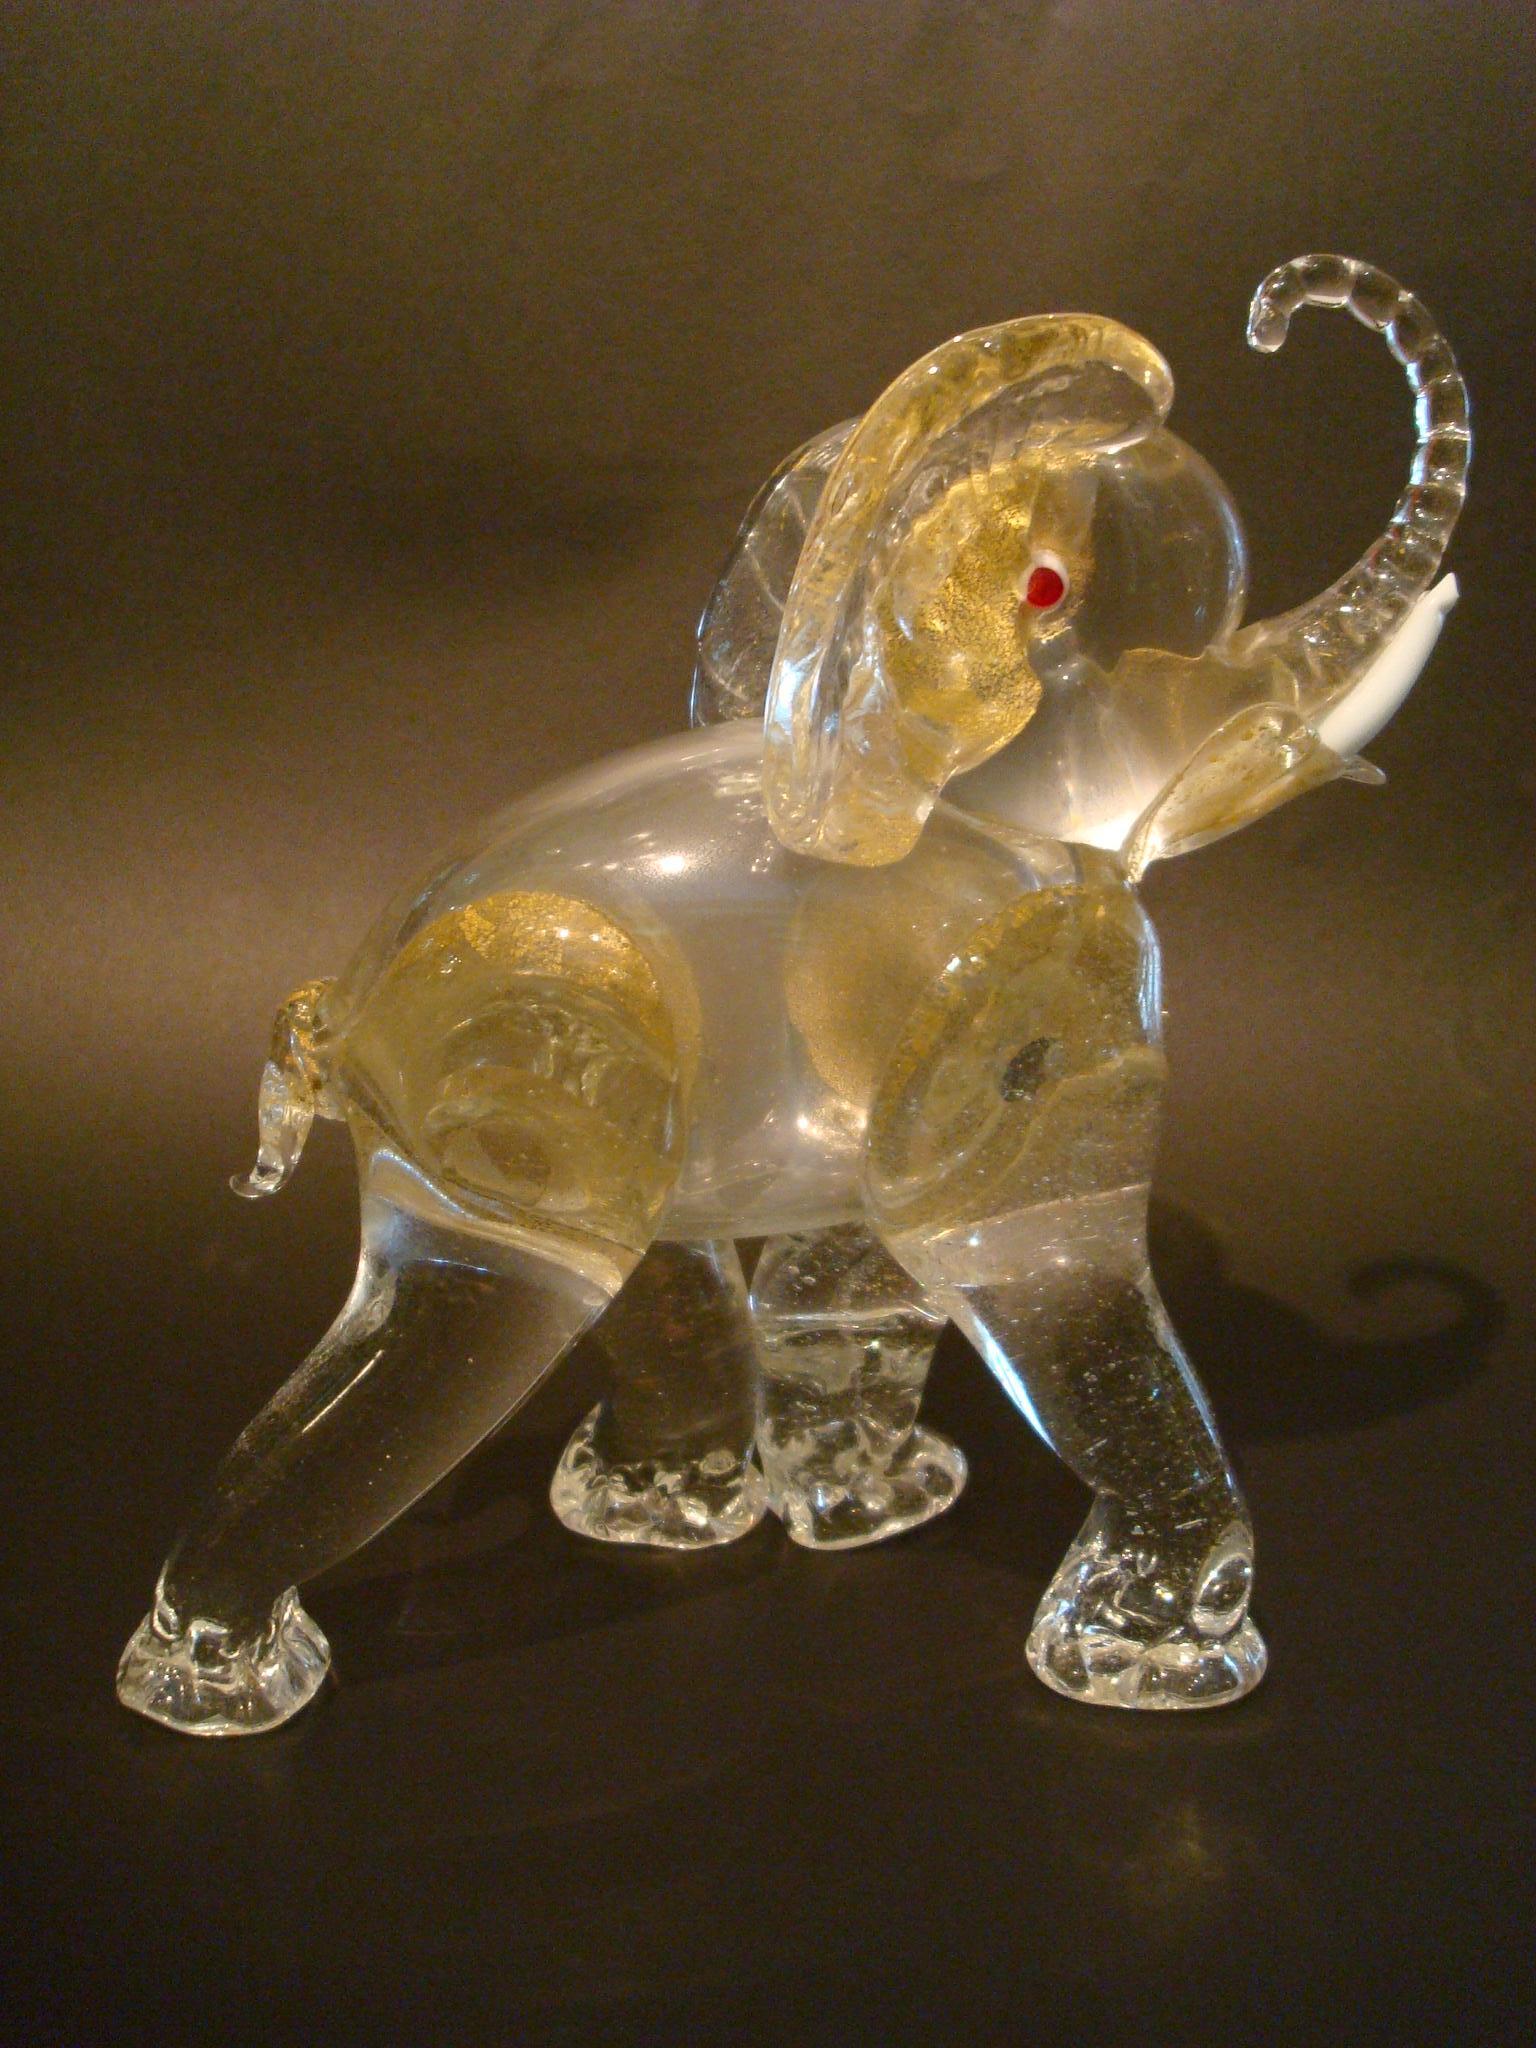 Gorgeous early gold Murano glass elephant figure / sculpture, circa 1930s-1940s. Clear glass with gold foil application, lattimo tusks, red-centred white eyes. Designed by Ercole Barovier
Perfect condition.